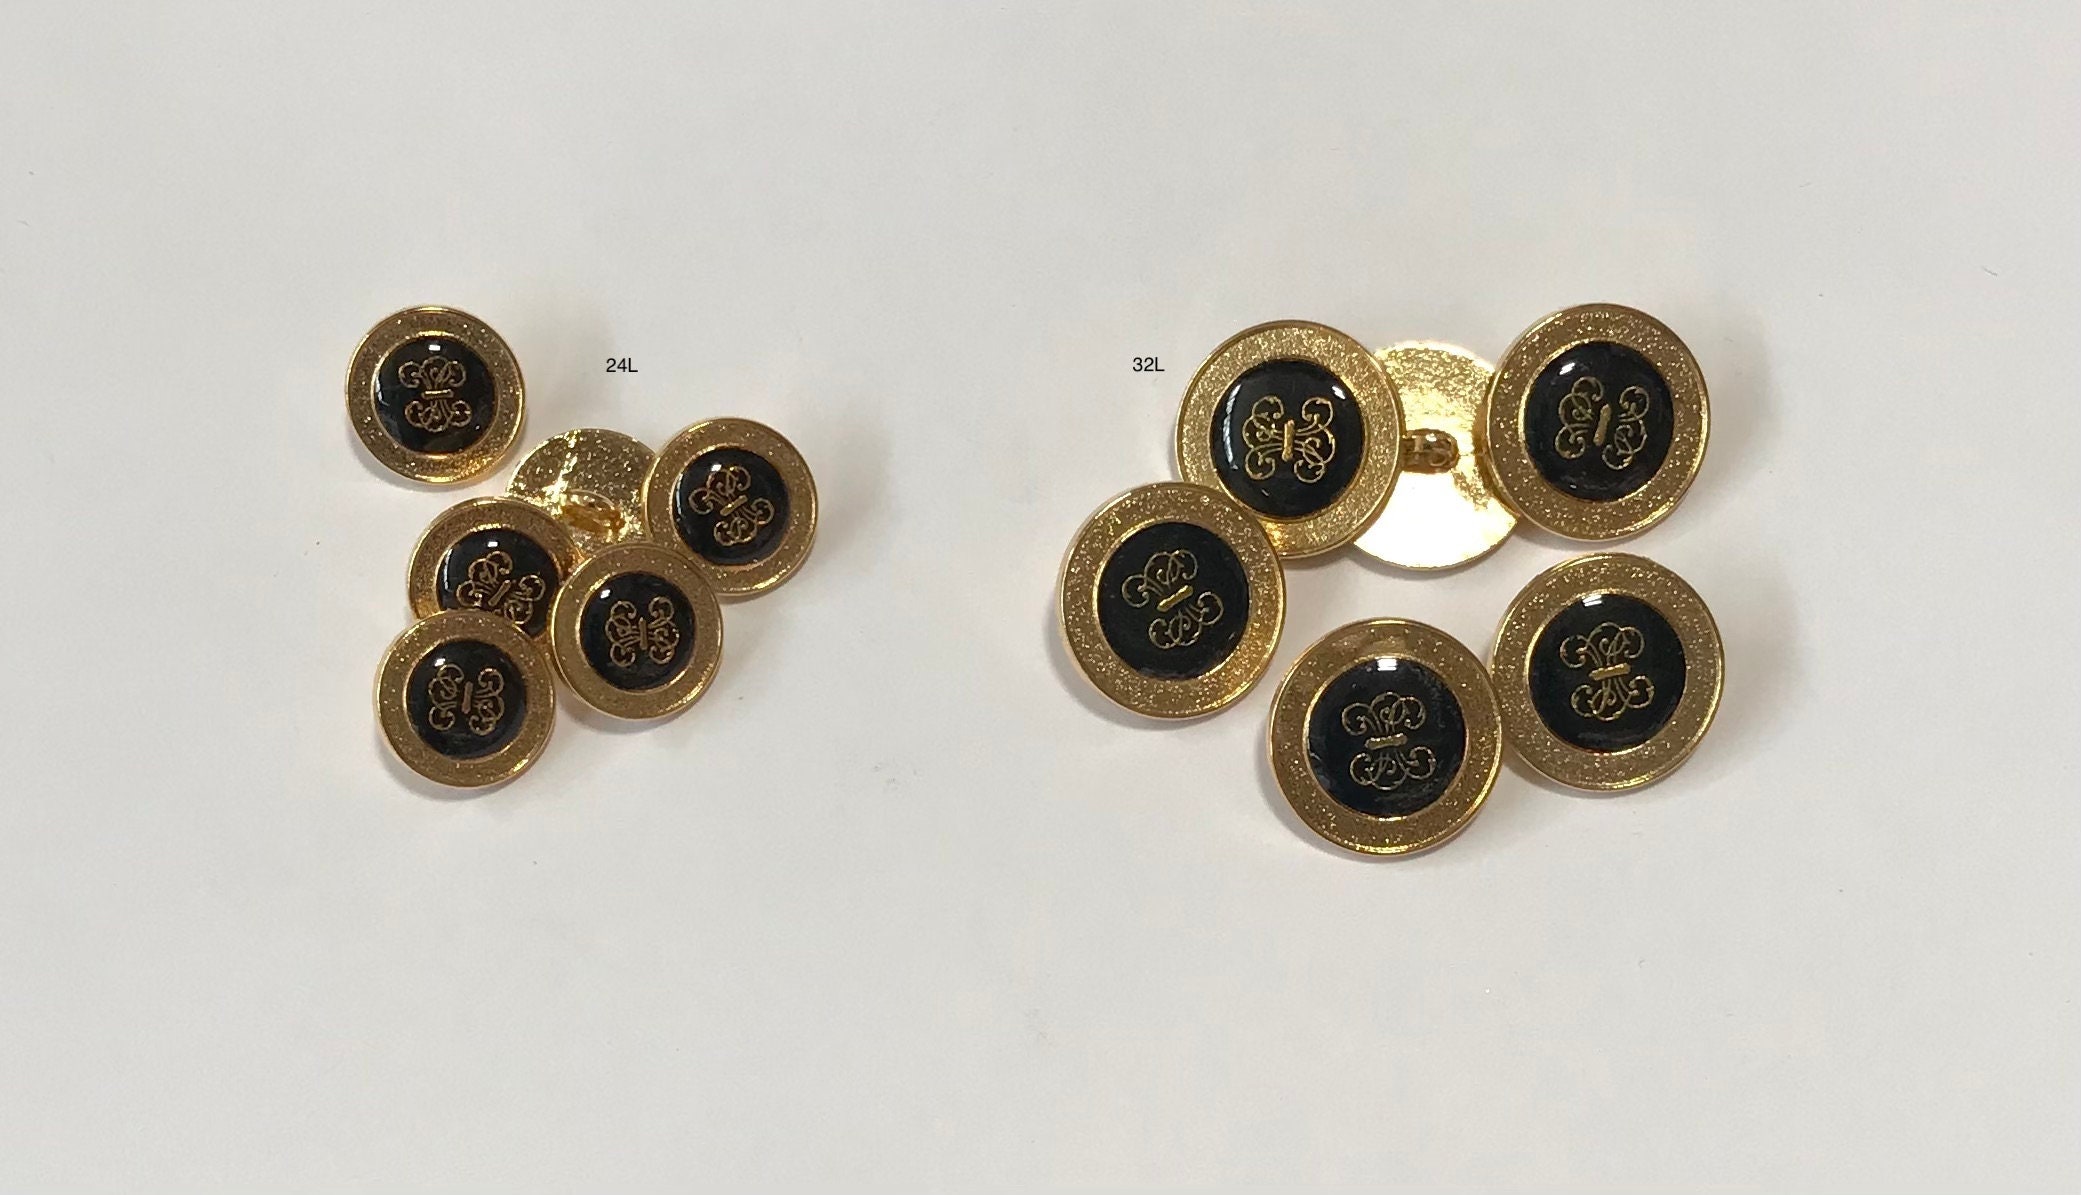 Grekywin High-Grade British Style Metal Buttons for Coat, Blazer, Suits,  Uniform, Jacket, etc, Crown Style (Frosted Gold)